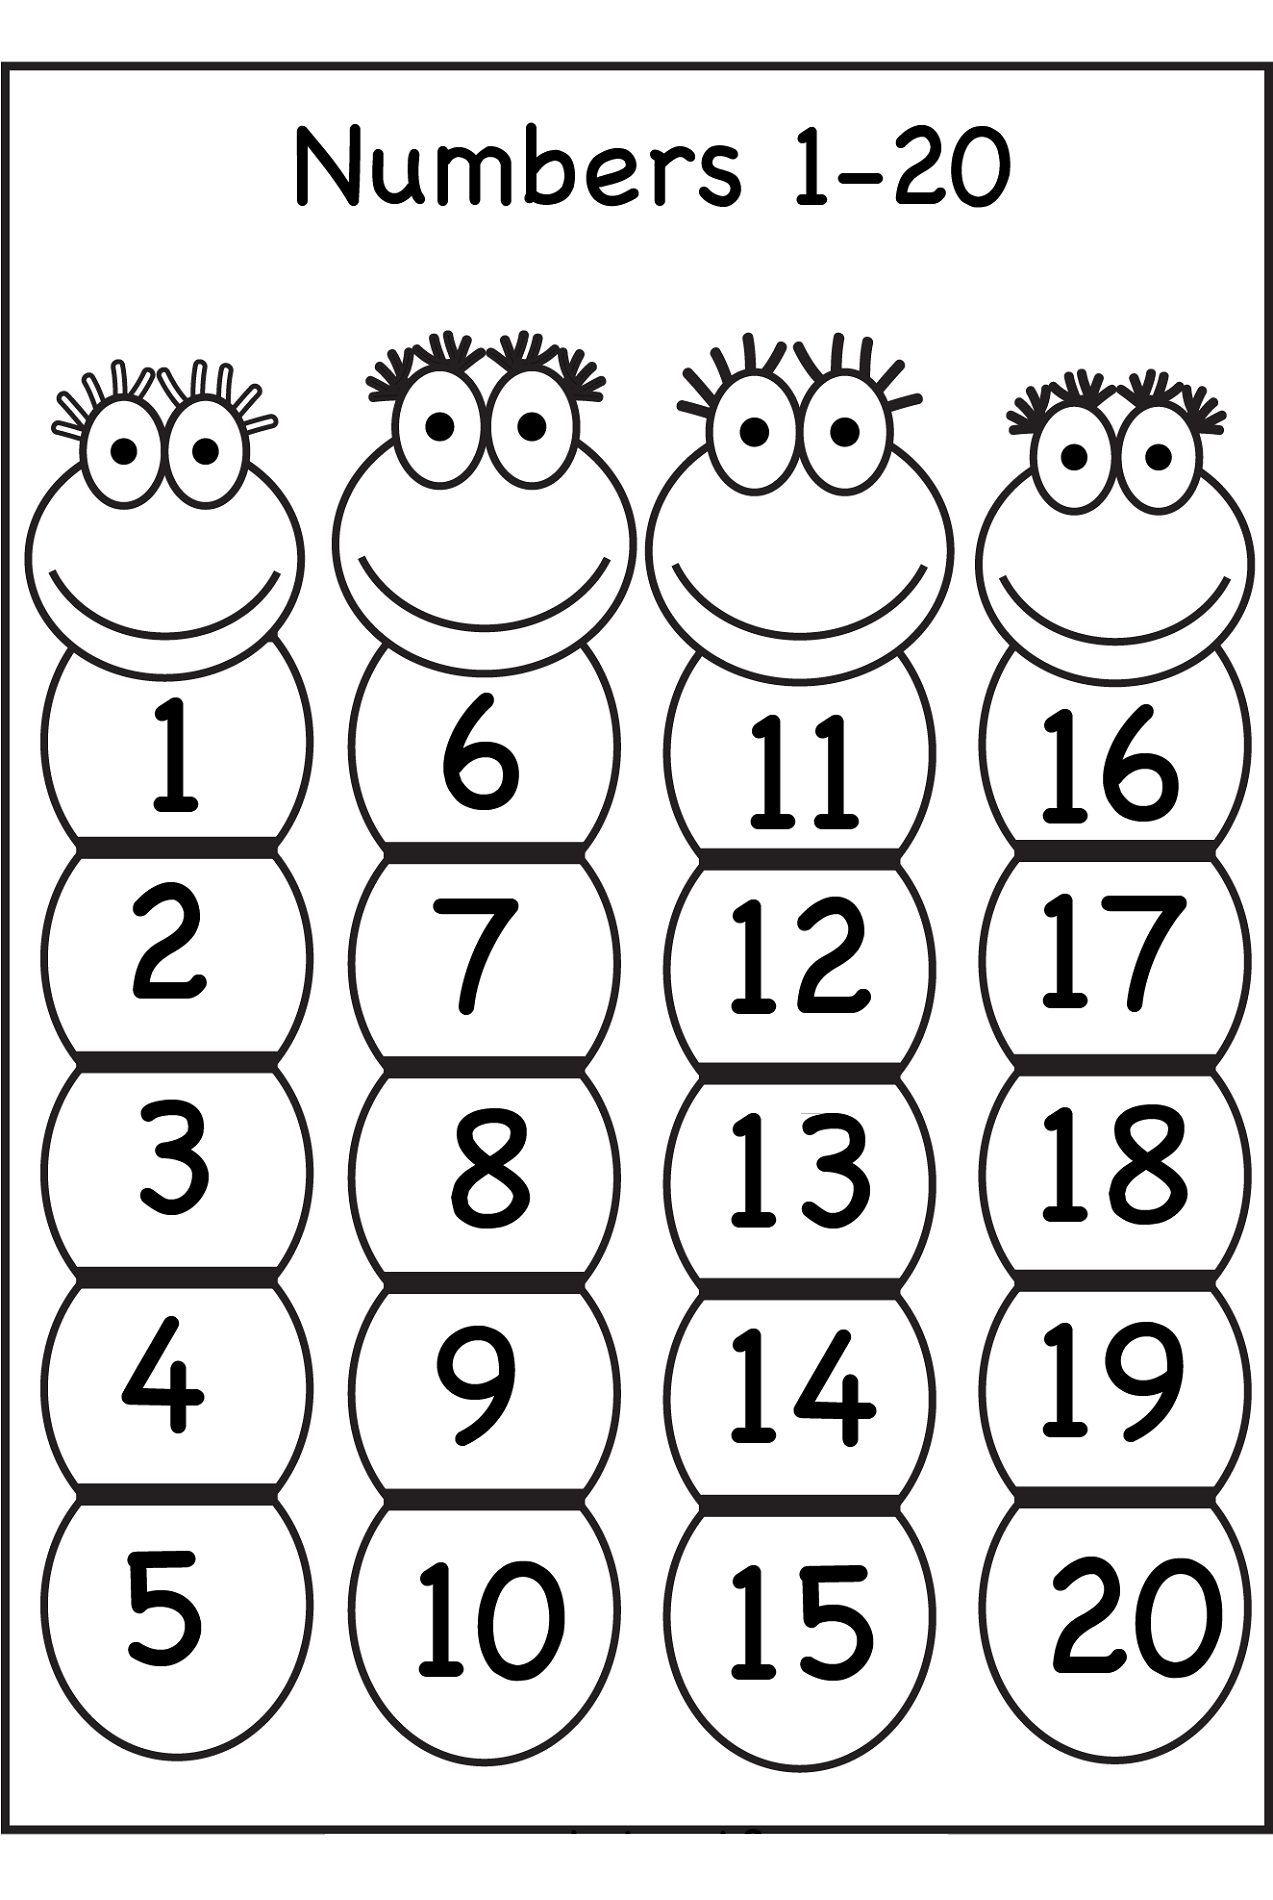 number-tracing-11-20-worksheet-digital-free-trace-the-numbers-11-20-worksheets-for-kids